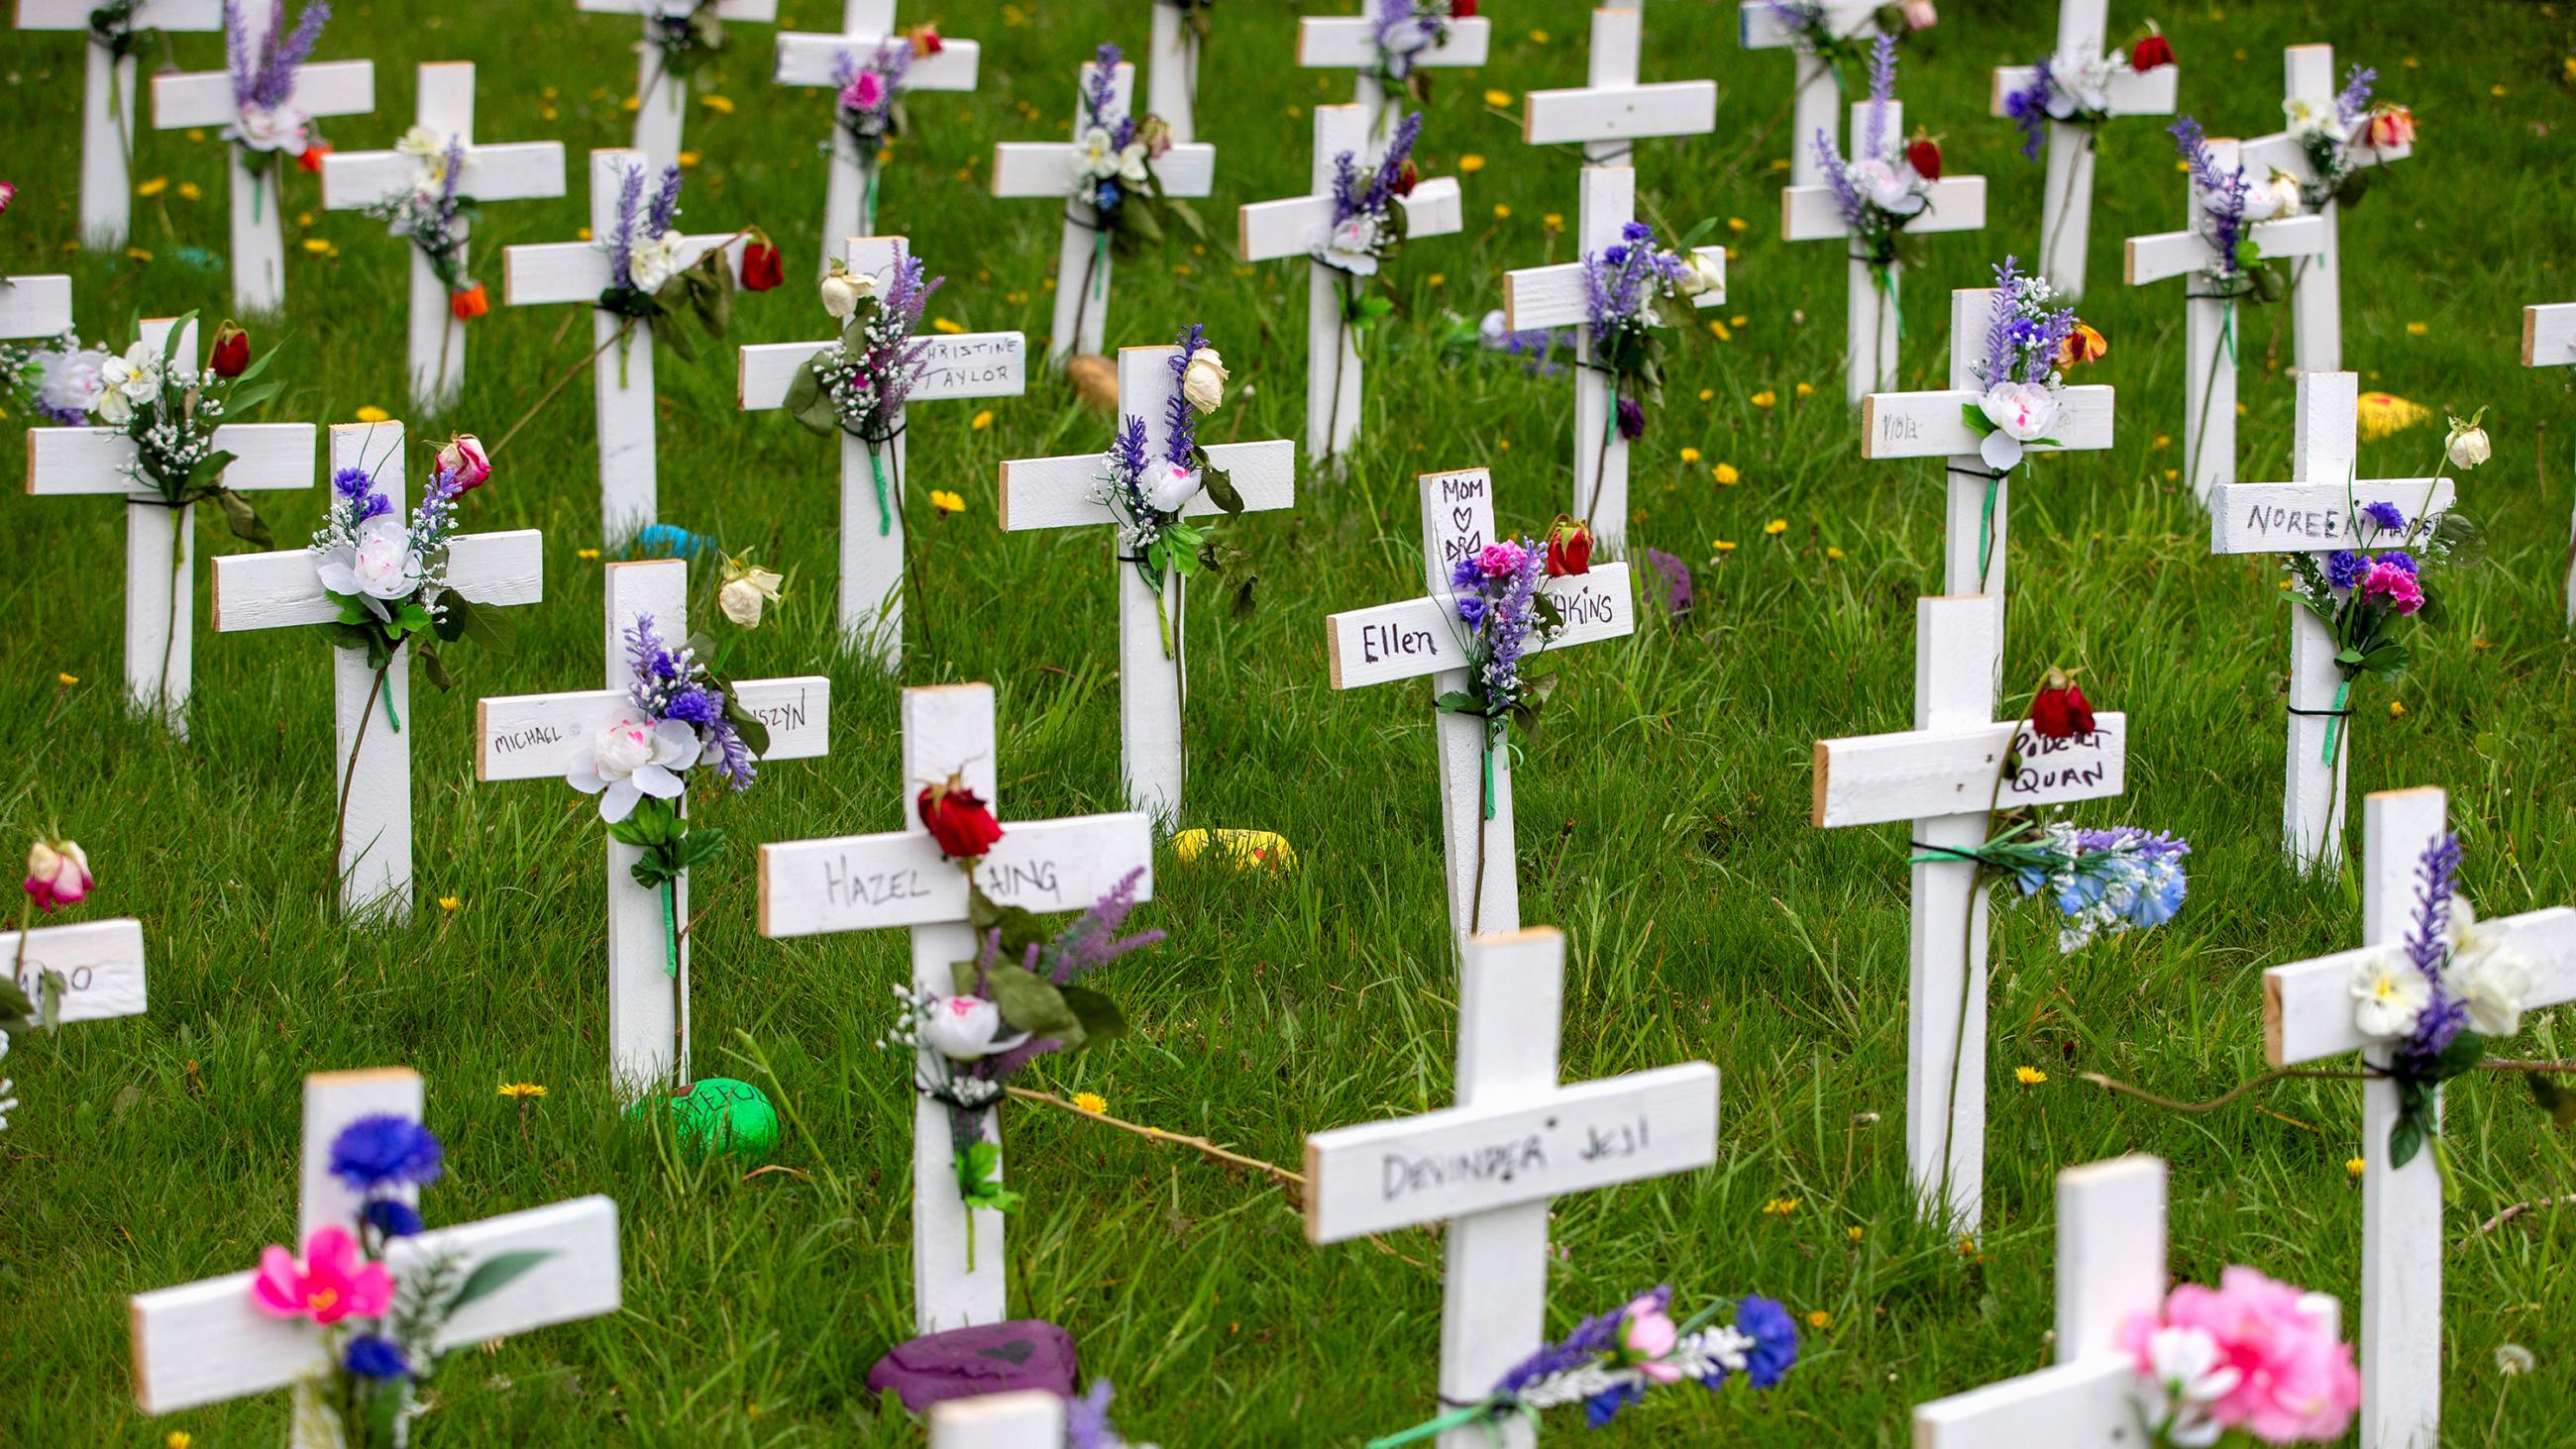 The photo shows a field of simple white wooden crosses, each with a hand-written name and a flower affixed to the front, in a grassy field. 